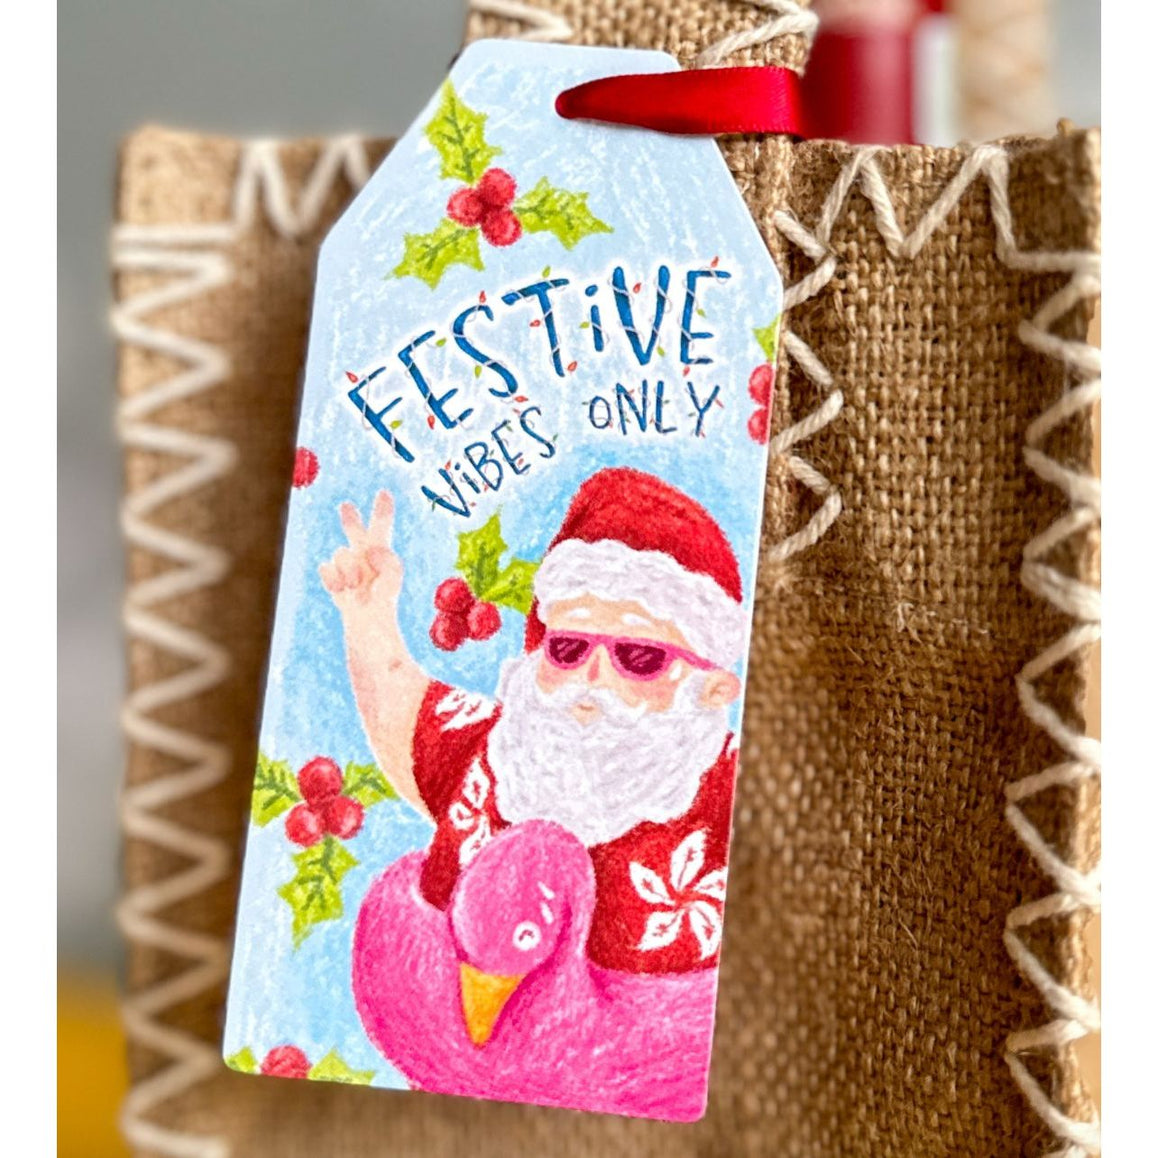 CHARITY CHRISTMAS GIFT TAGS: Santa Vibes Only- 10 piece bundle